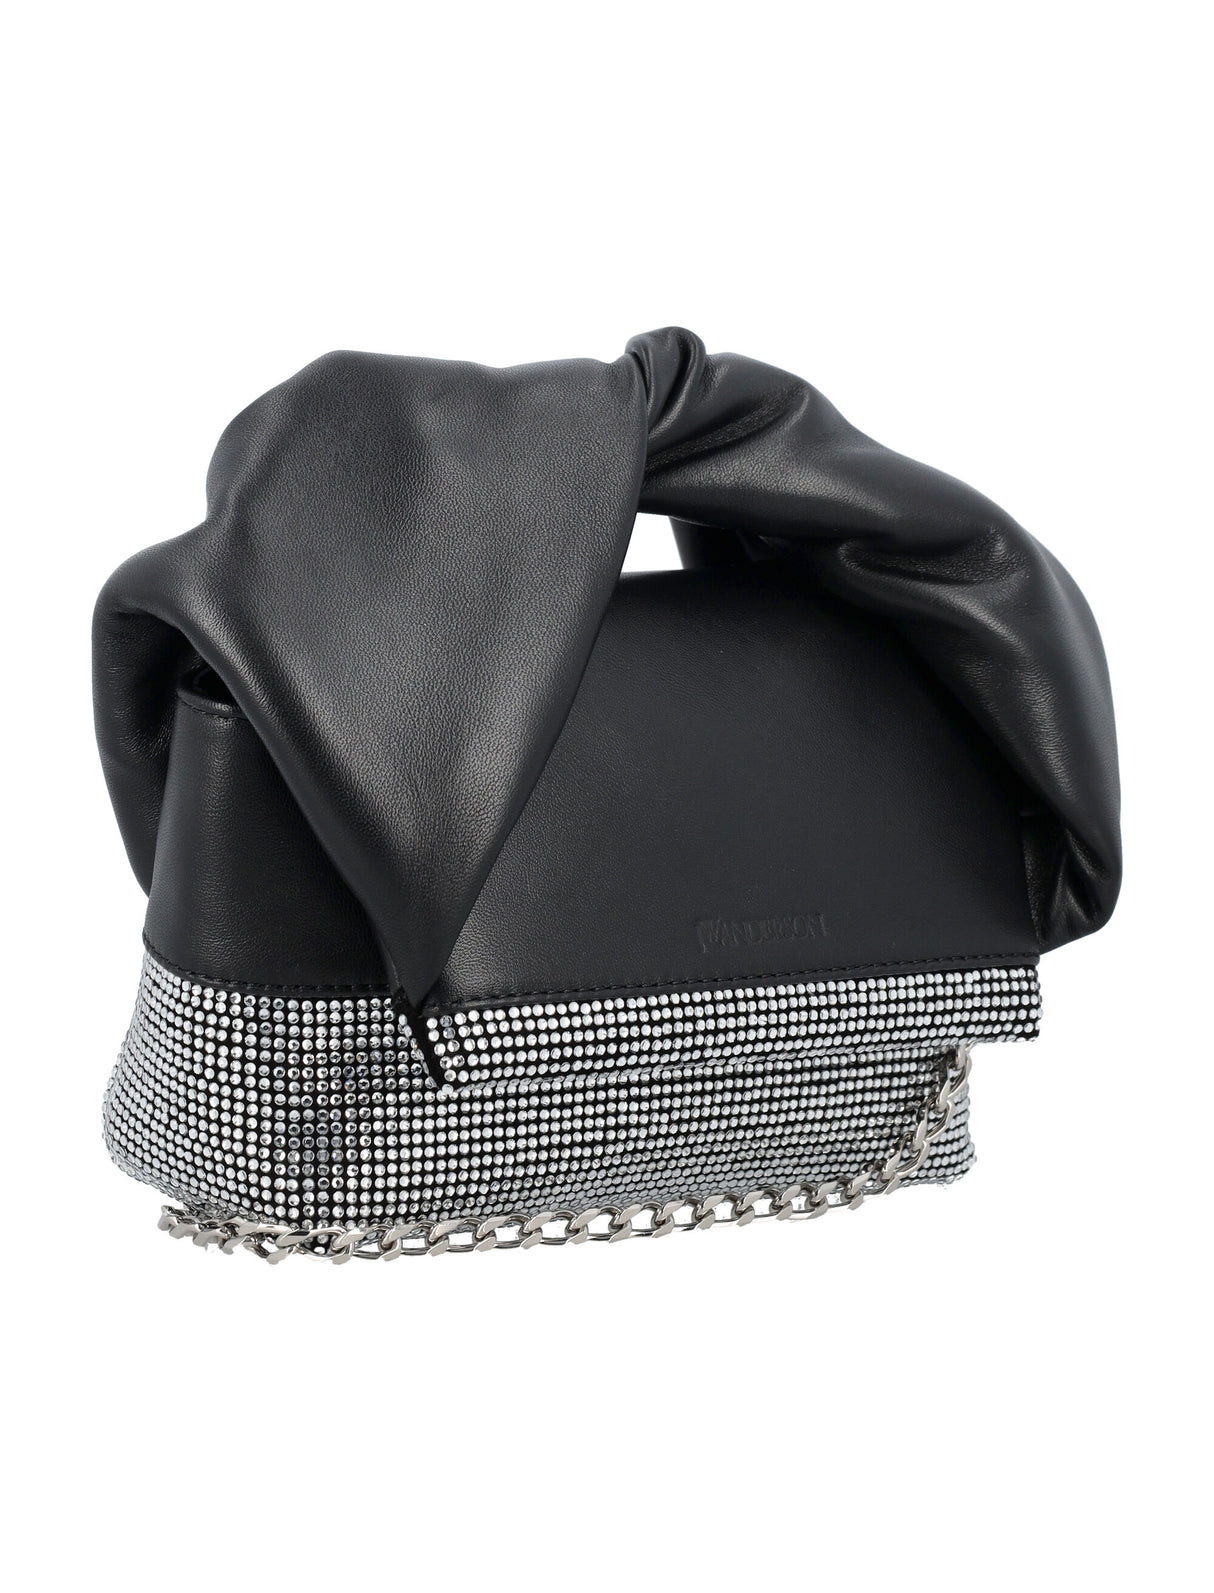 JW ANDERSON Mini Twister Crystal-Embellished Leather Handbag with Silver Chain - Black